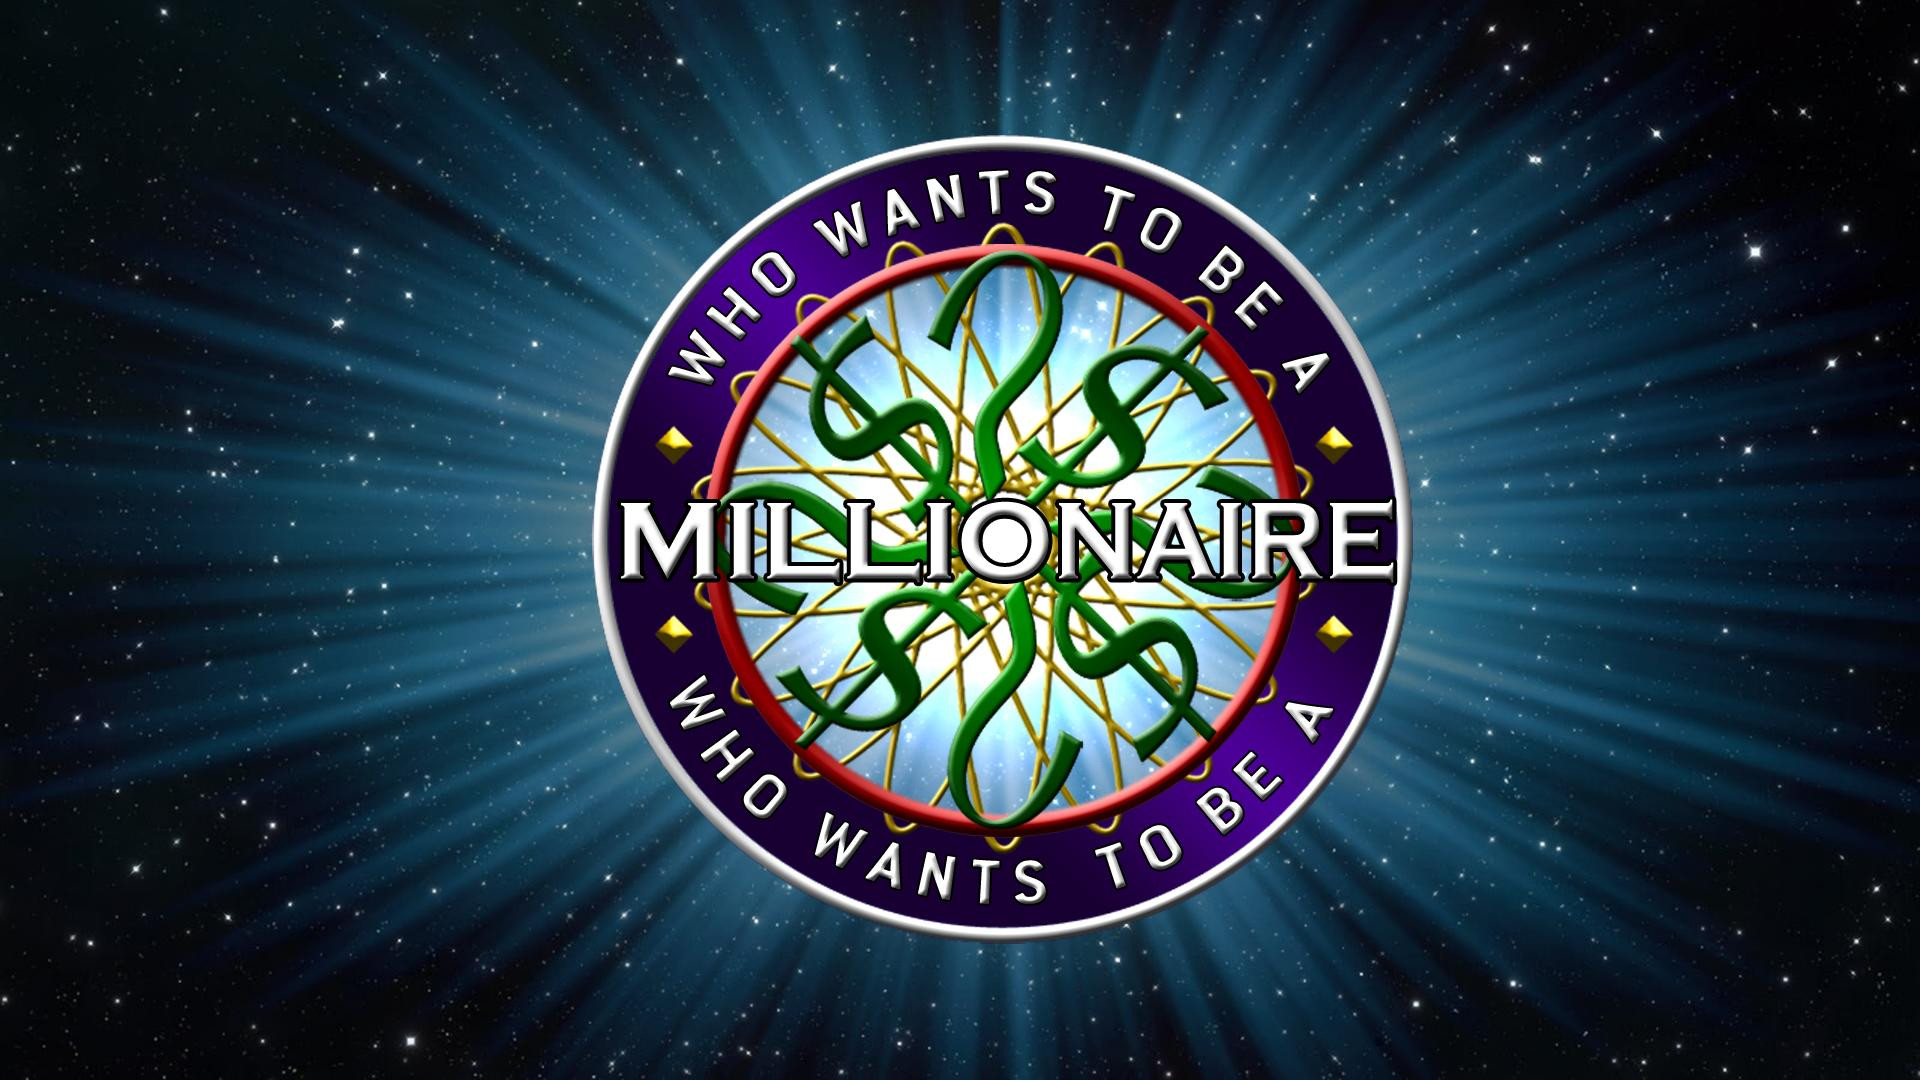 HQ Who Wants To Be A Millionaire Wallpapers | File 338.96Kb